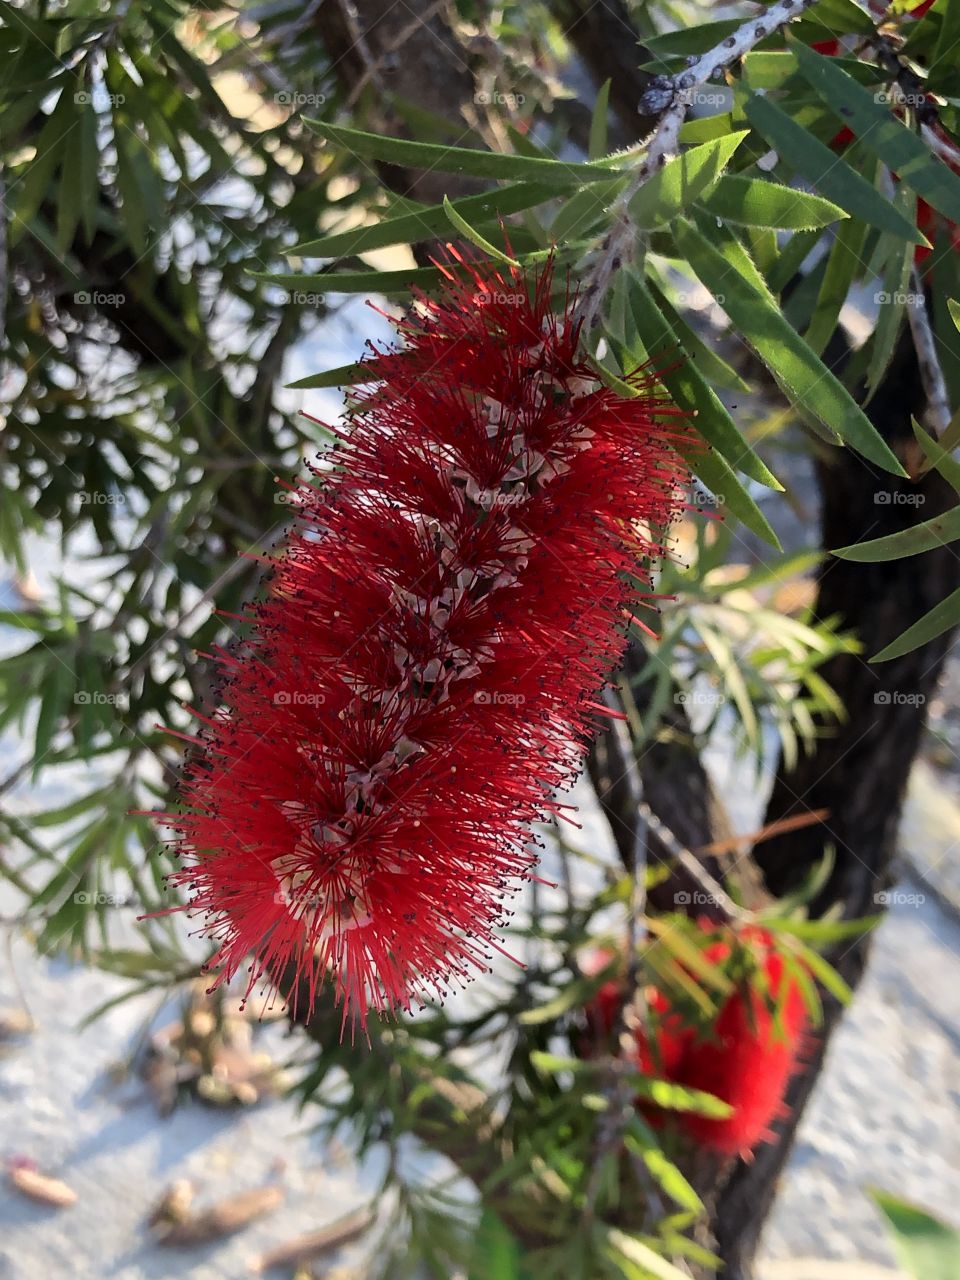 These red flowers look like fruits or ties when looking from some distance. But looking closer, they are just different, yet beautiful flowers.